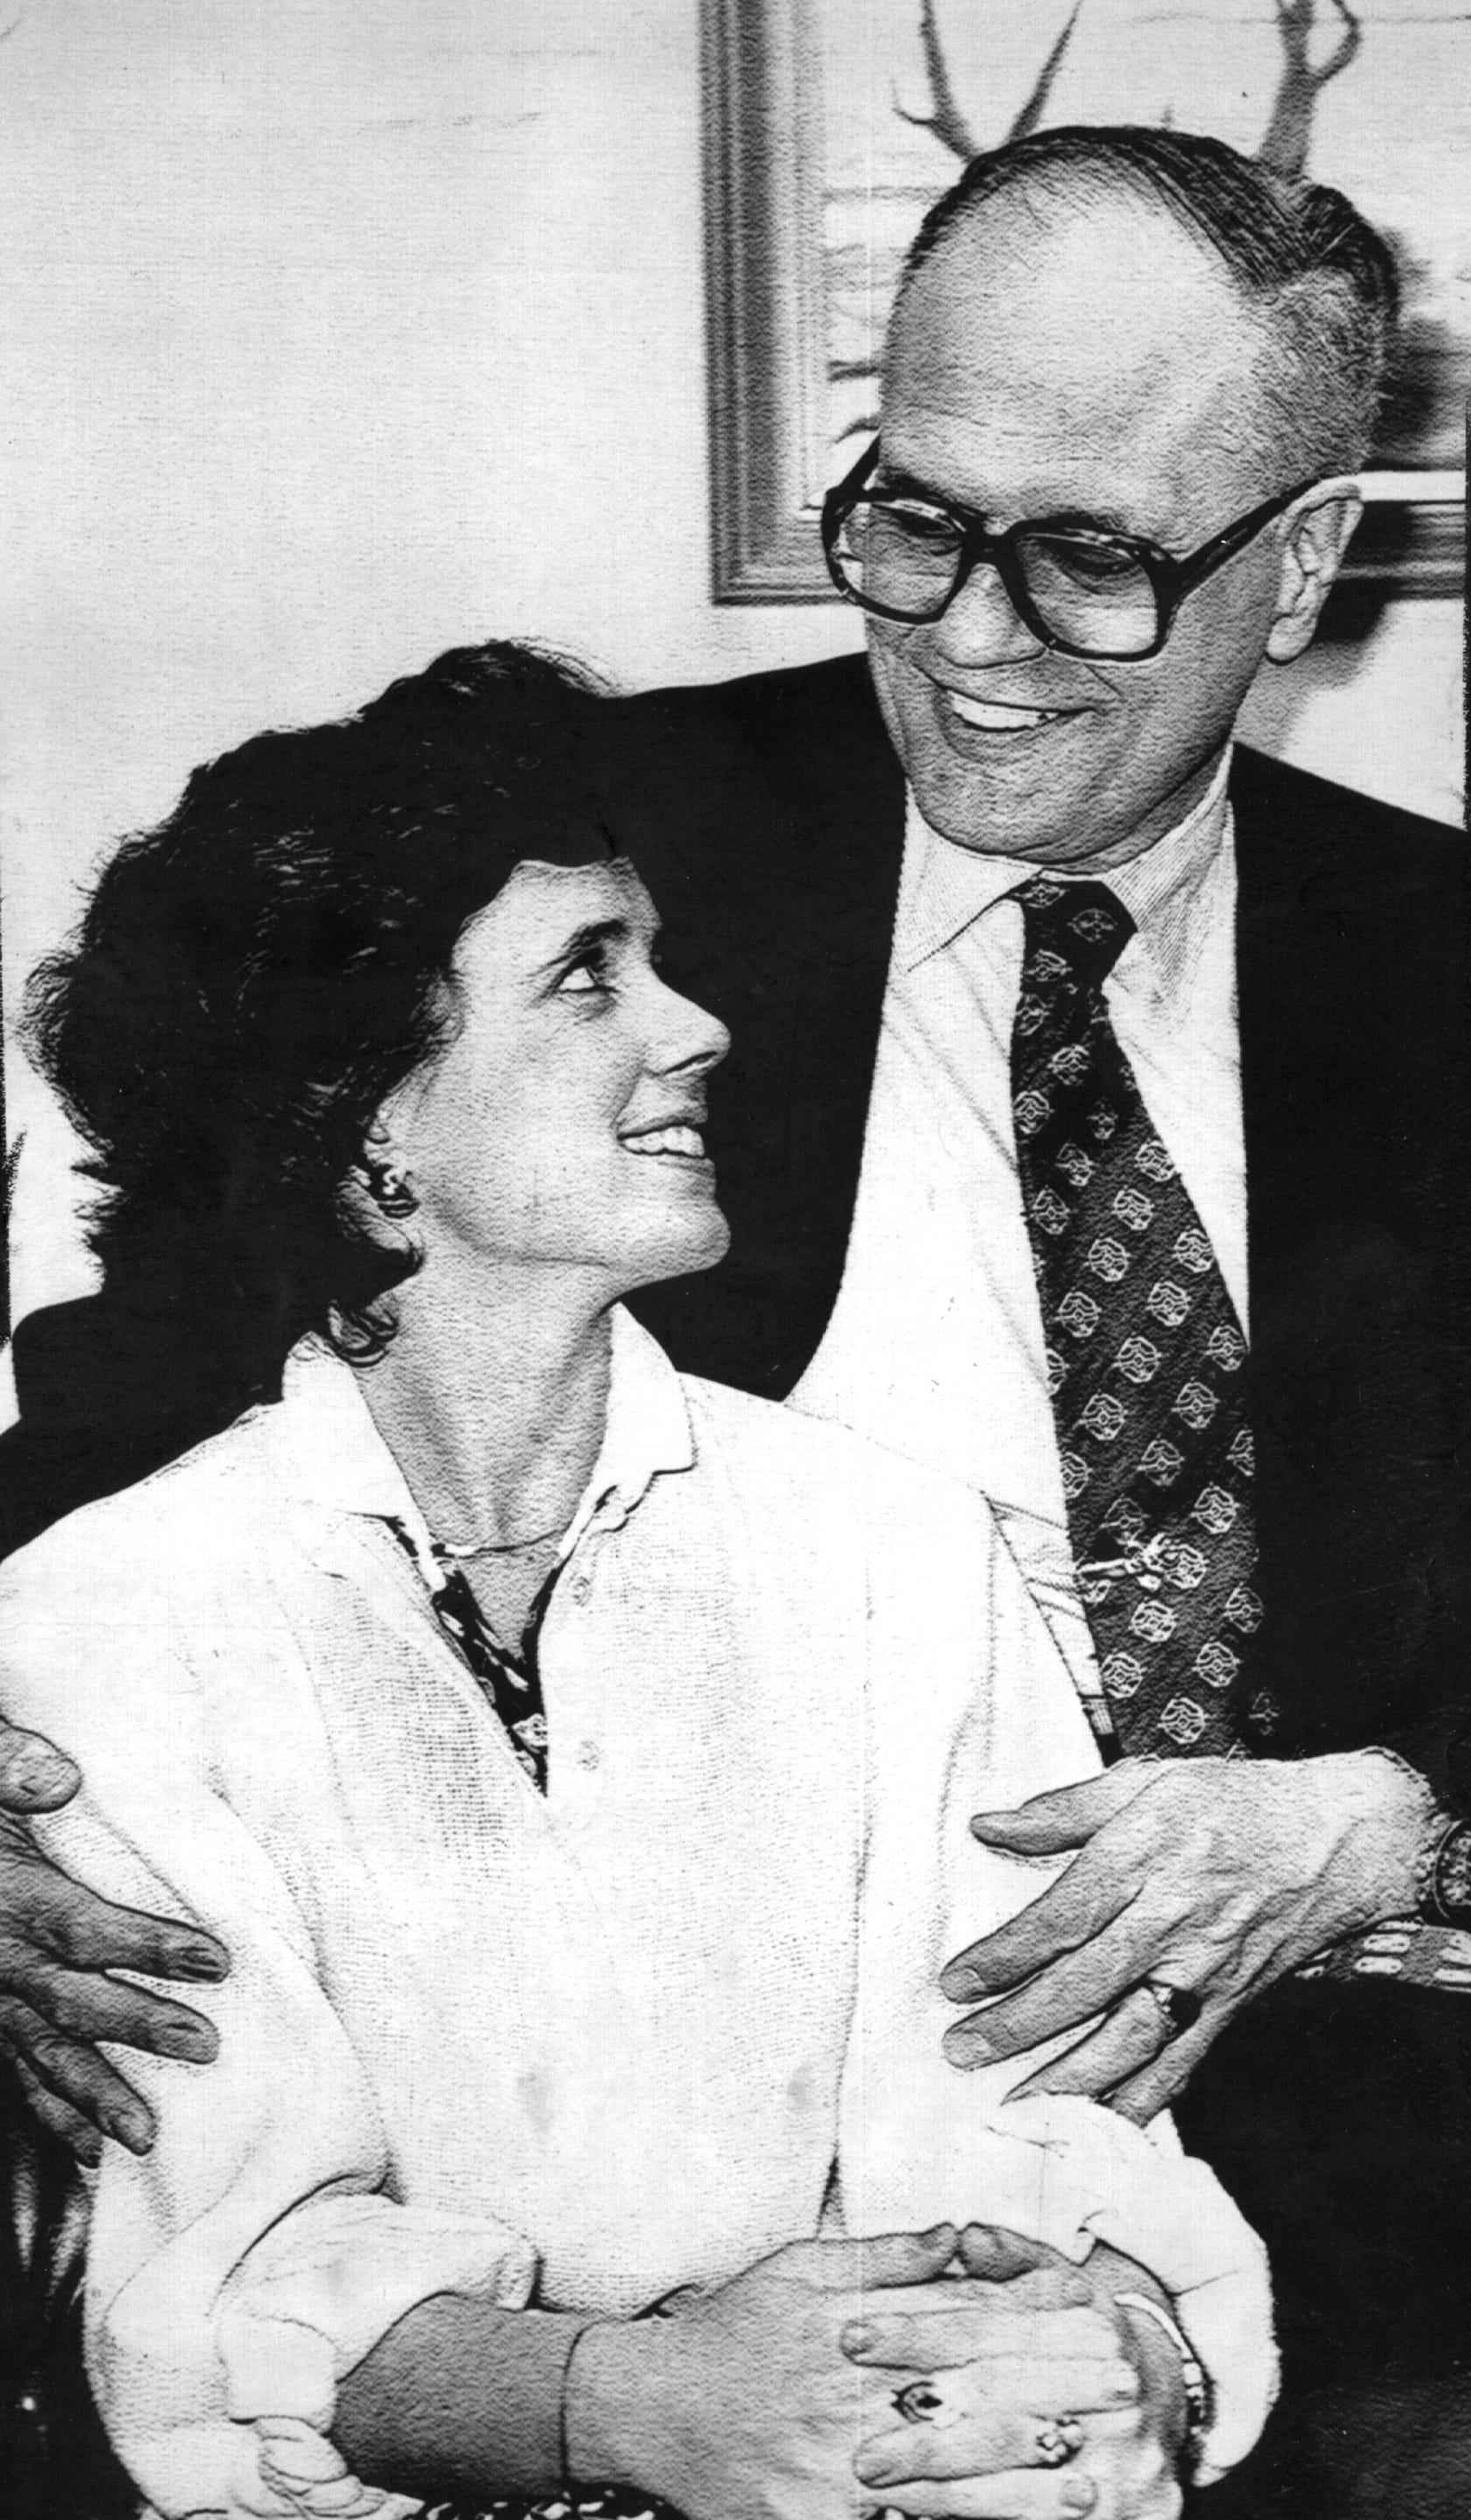 Rep. John Dingell Jr. poses with his wife to be, Deborah A. Insley, in his office on Capitol Hill on March 6, 1981.  "It was a good match," longtime friend and former Michigan attorney general Frank Kelley said of Dingell's second marriage. "She was his moral compass. People in public life need a very strong spouse."